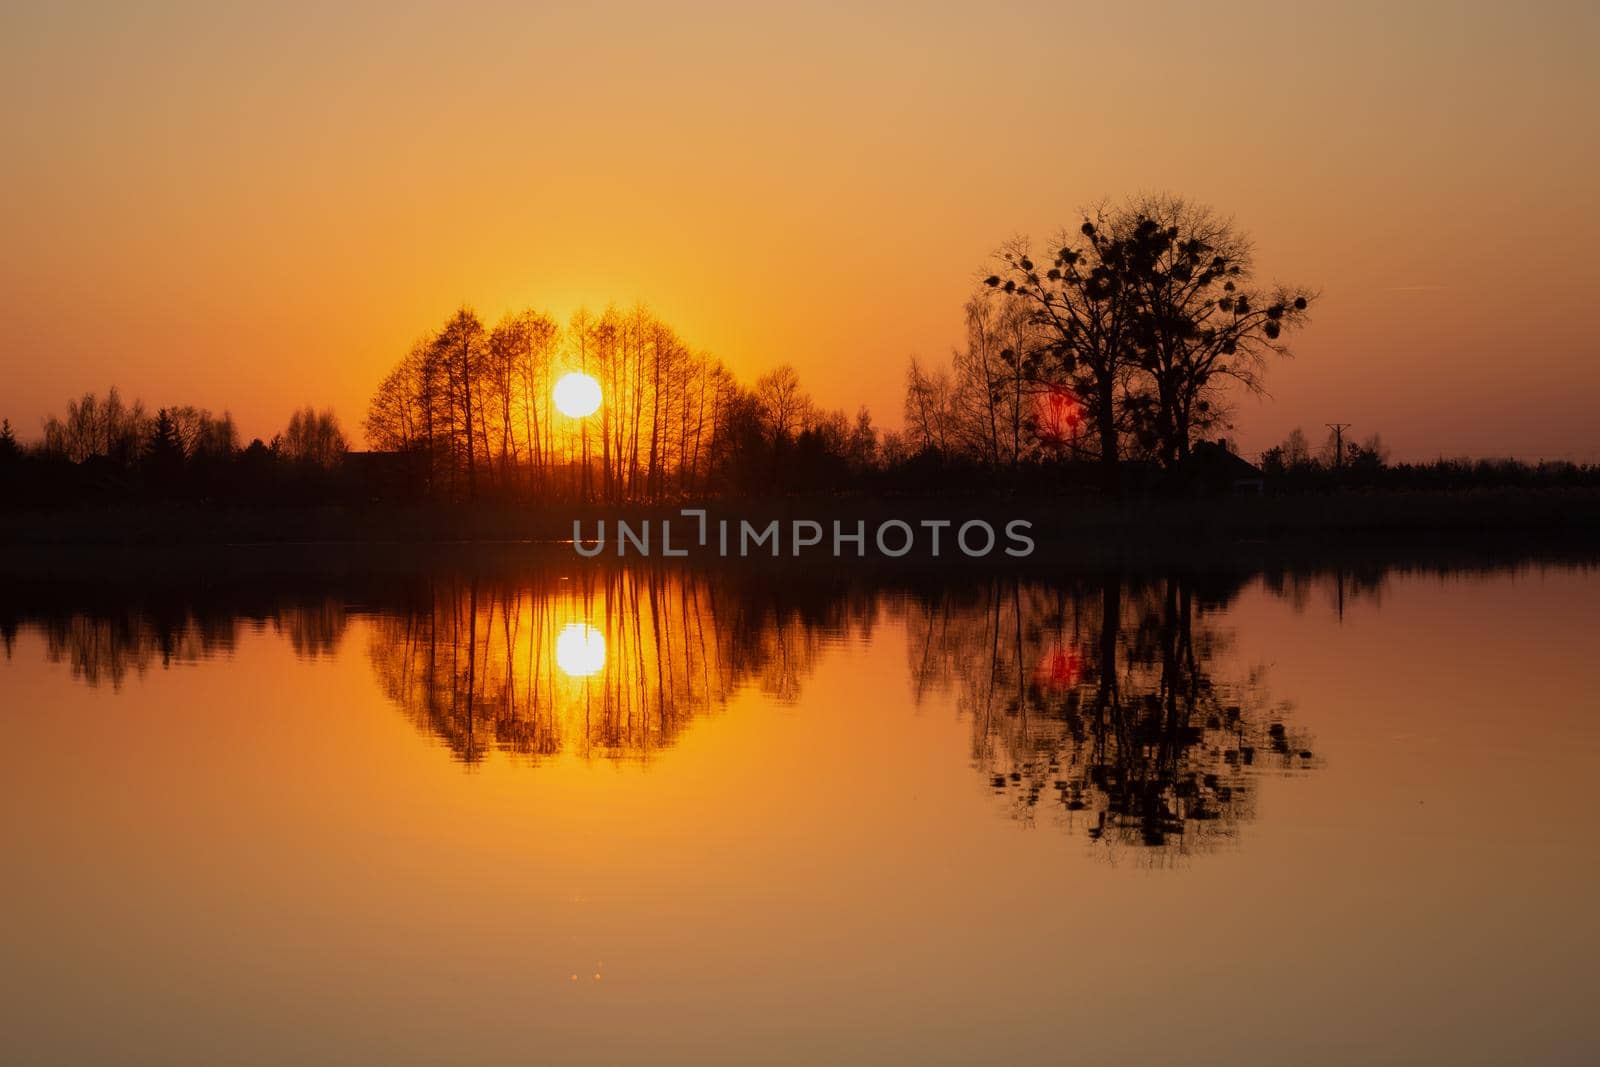 The reflection in the water of the sunset behind the trees, spring evening view